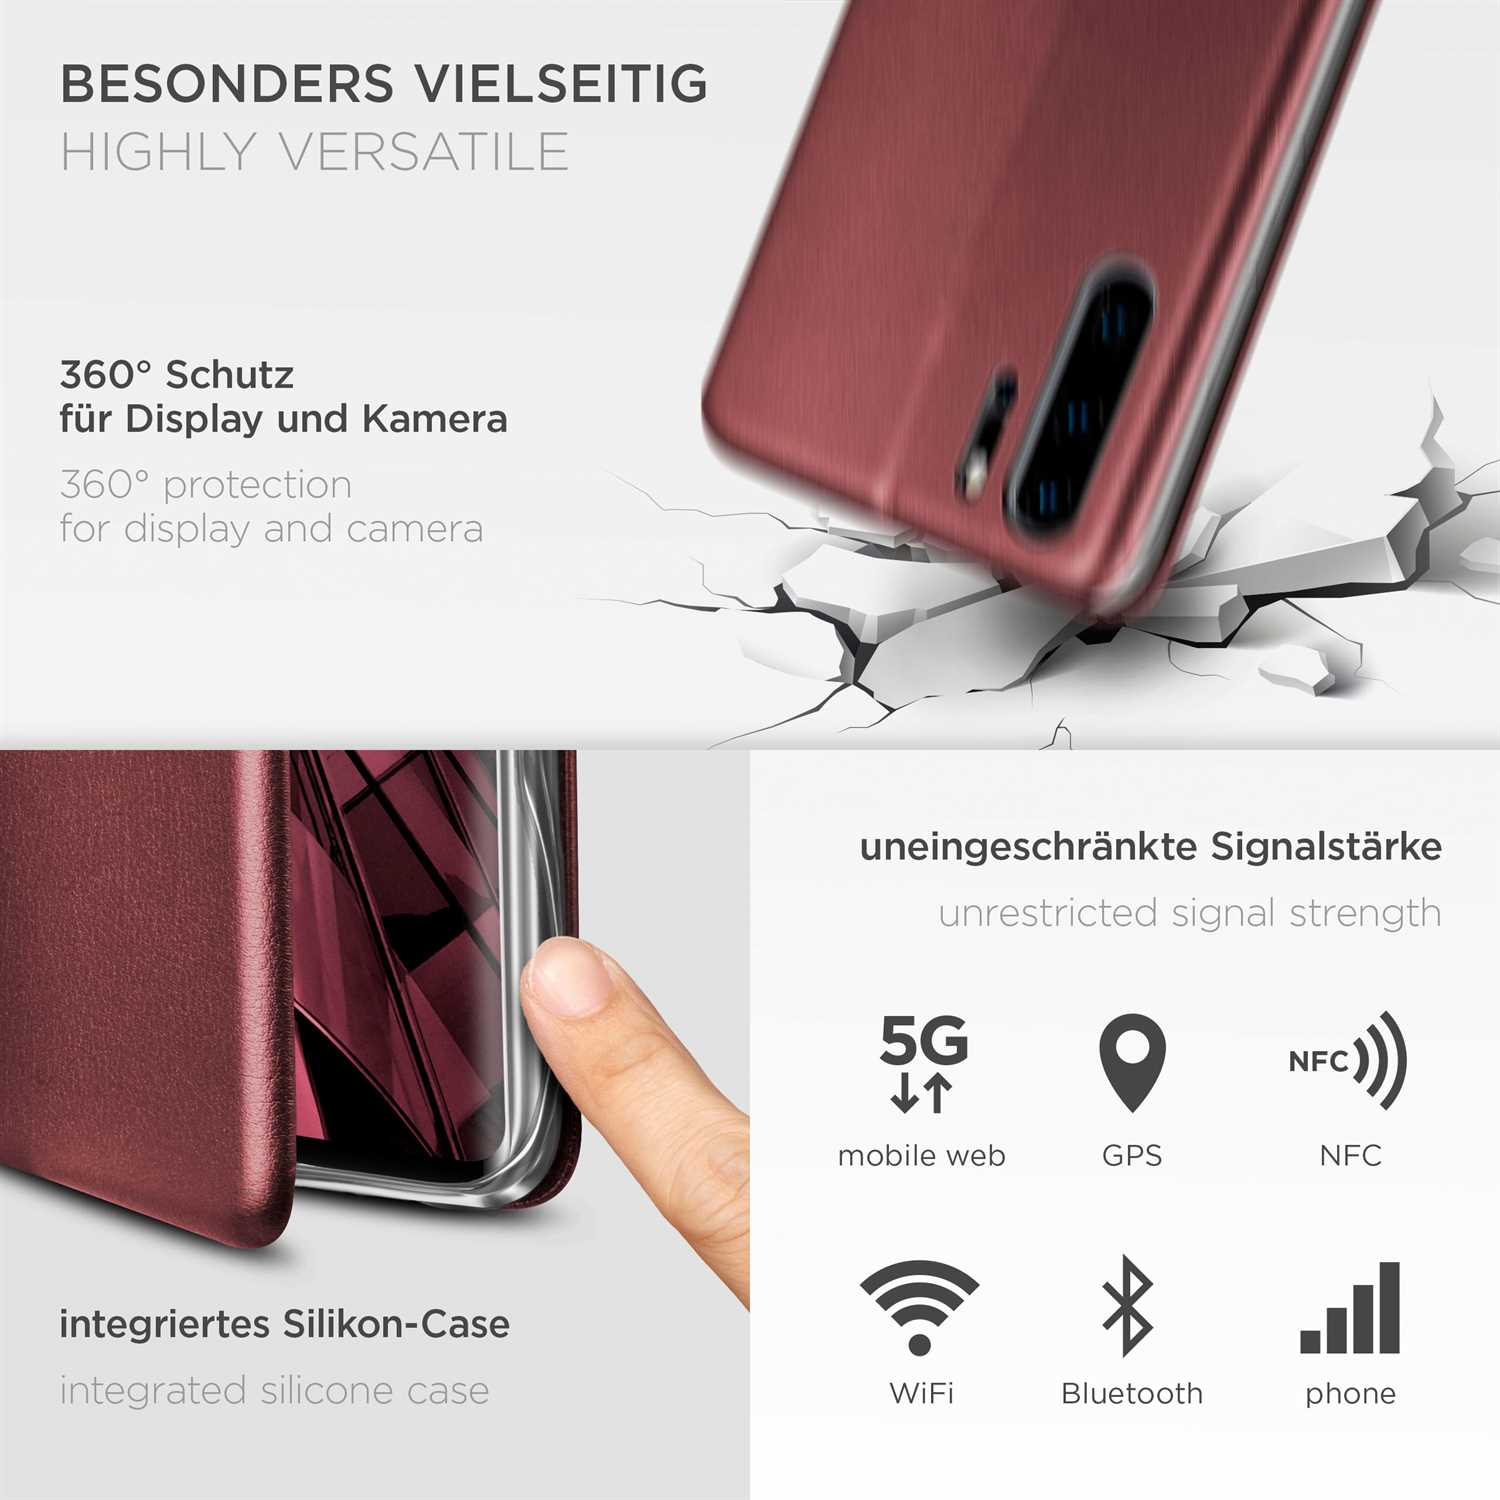 ONEFLOW Pro Cover, P30 Flip Burgund Edition, New Huawei, - Case, Business Red